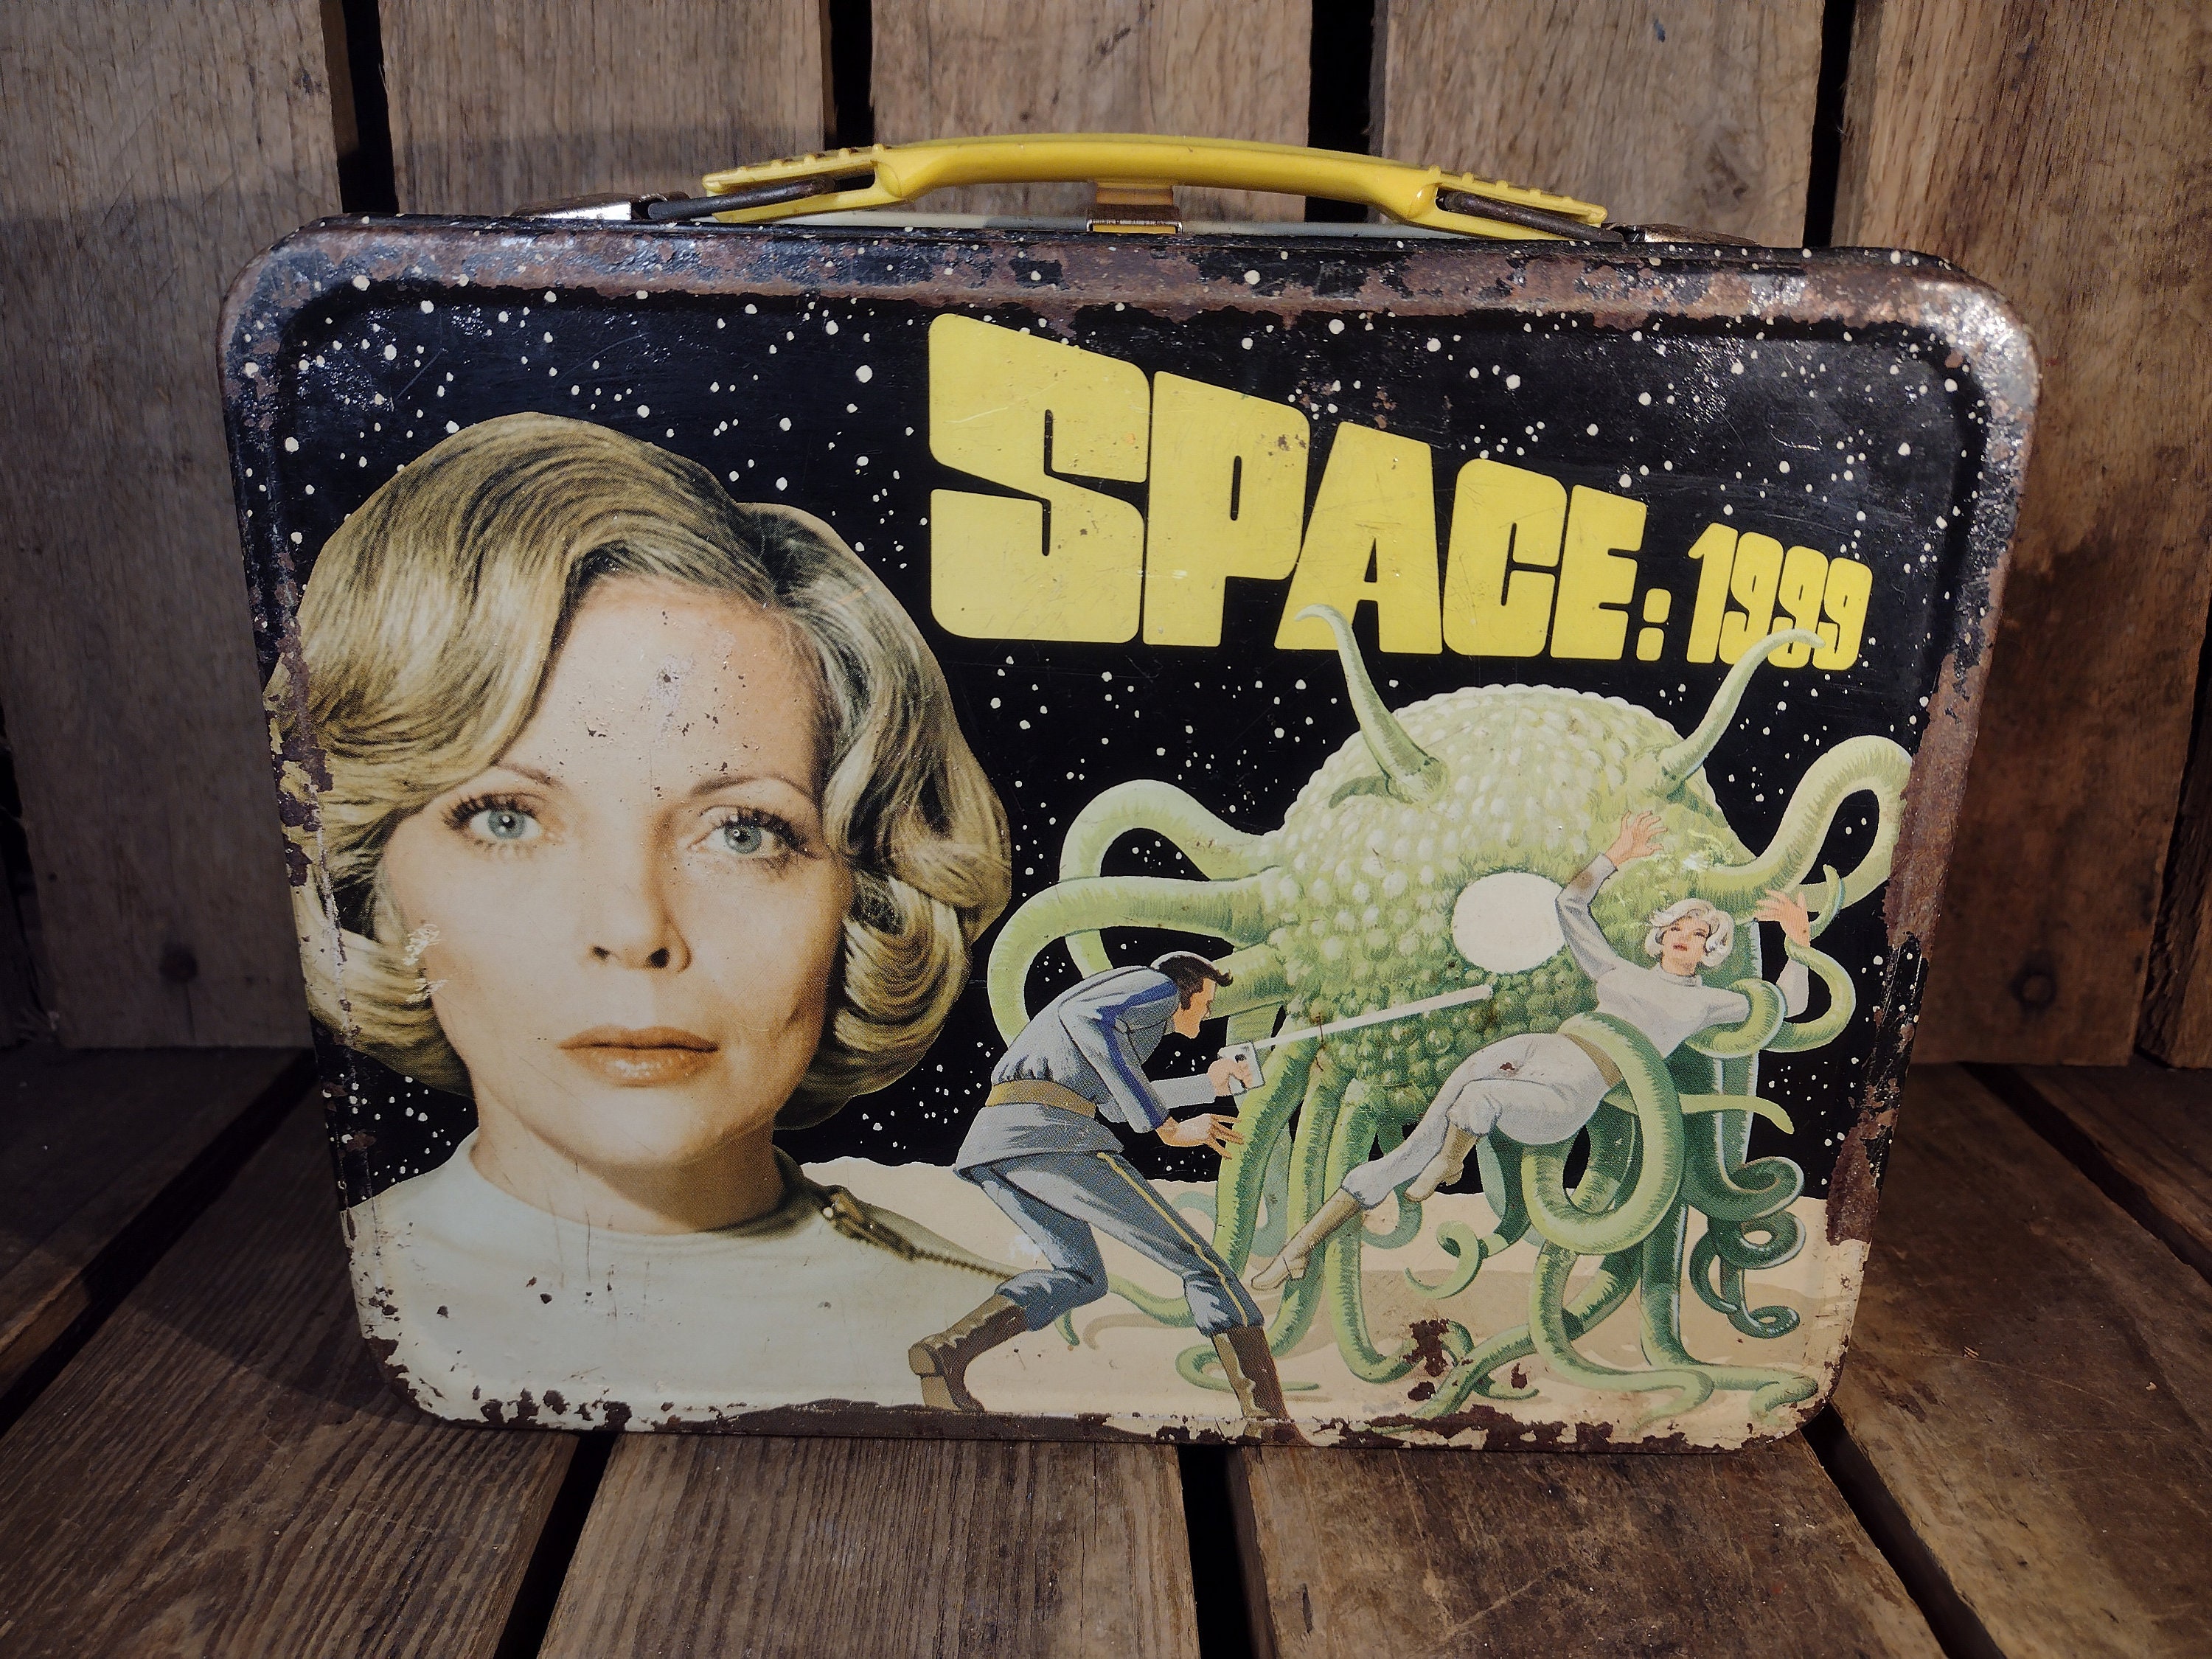 Original 1960s Thermos Space Lunchbox 